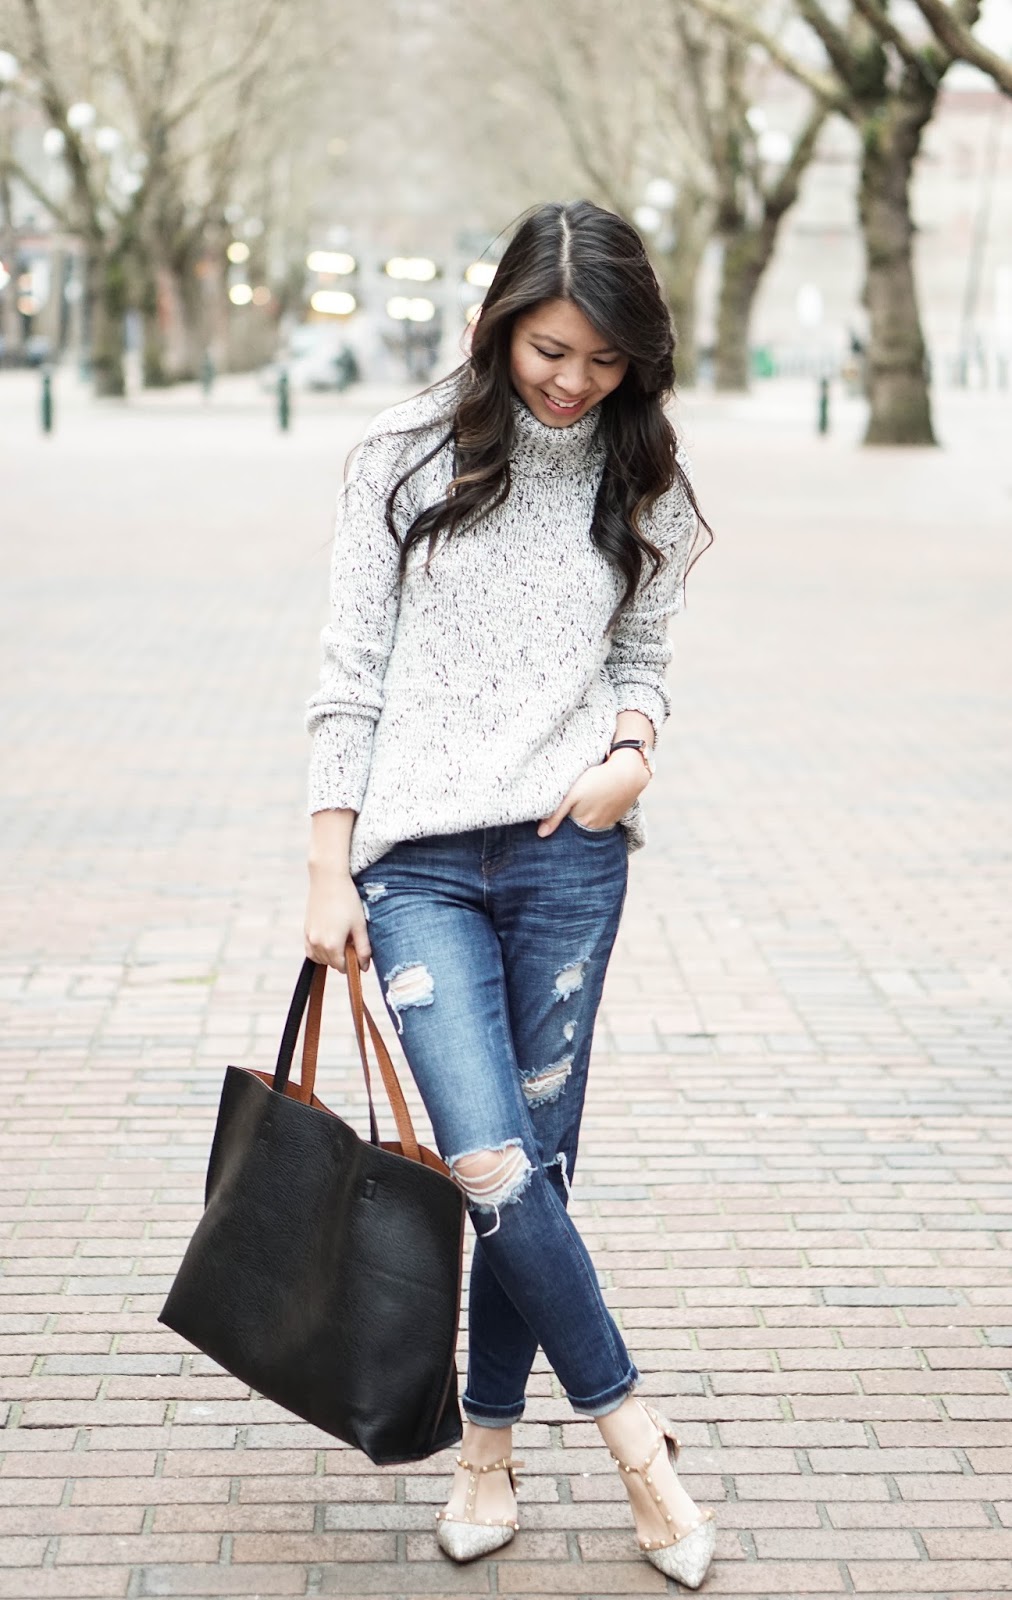 Brunch Attire: Knit Sweater, Ripped Jeans, and Studded Flats